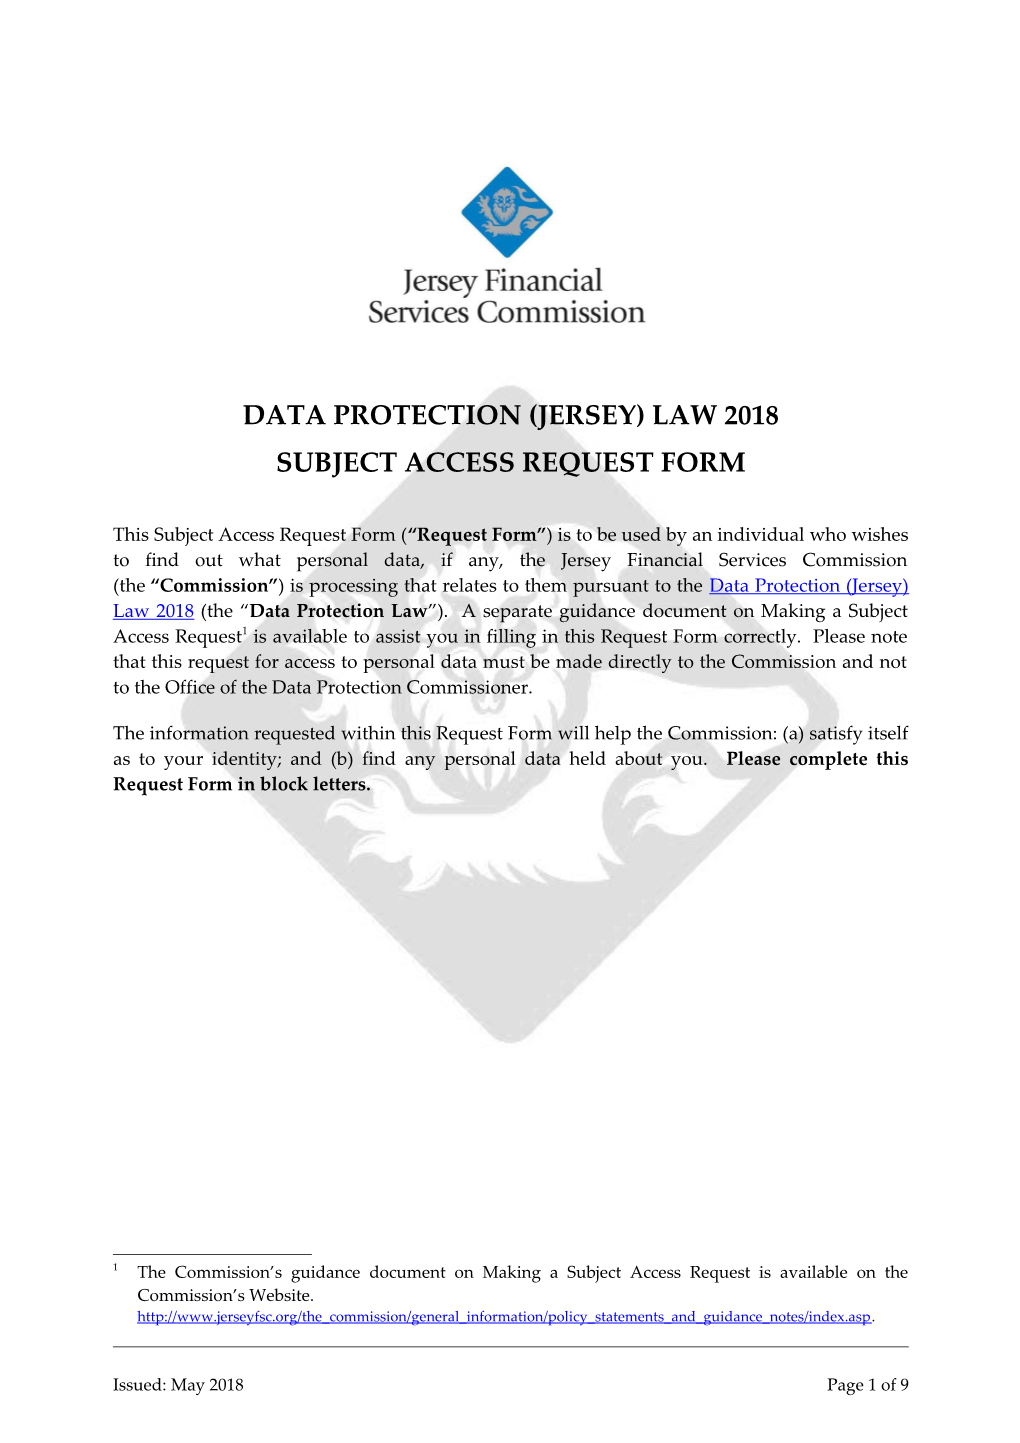 Data Protection (Jersey) Law 2018